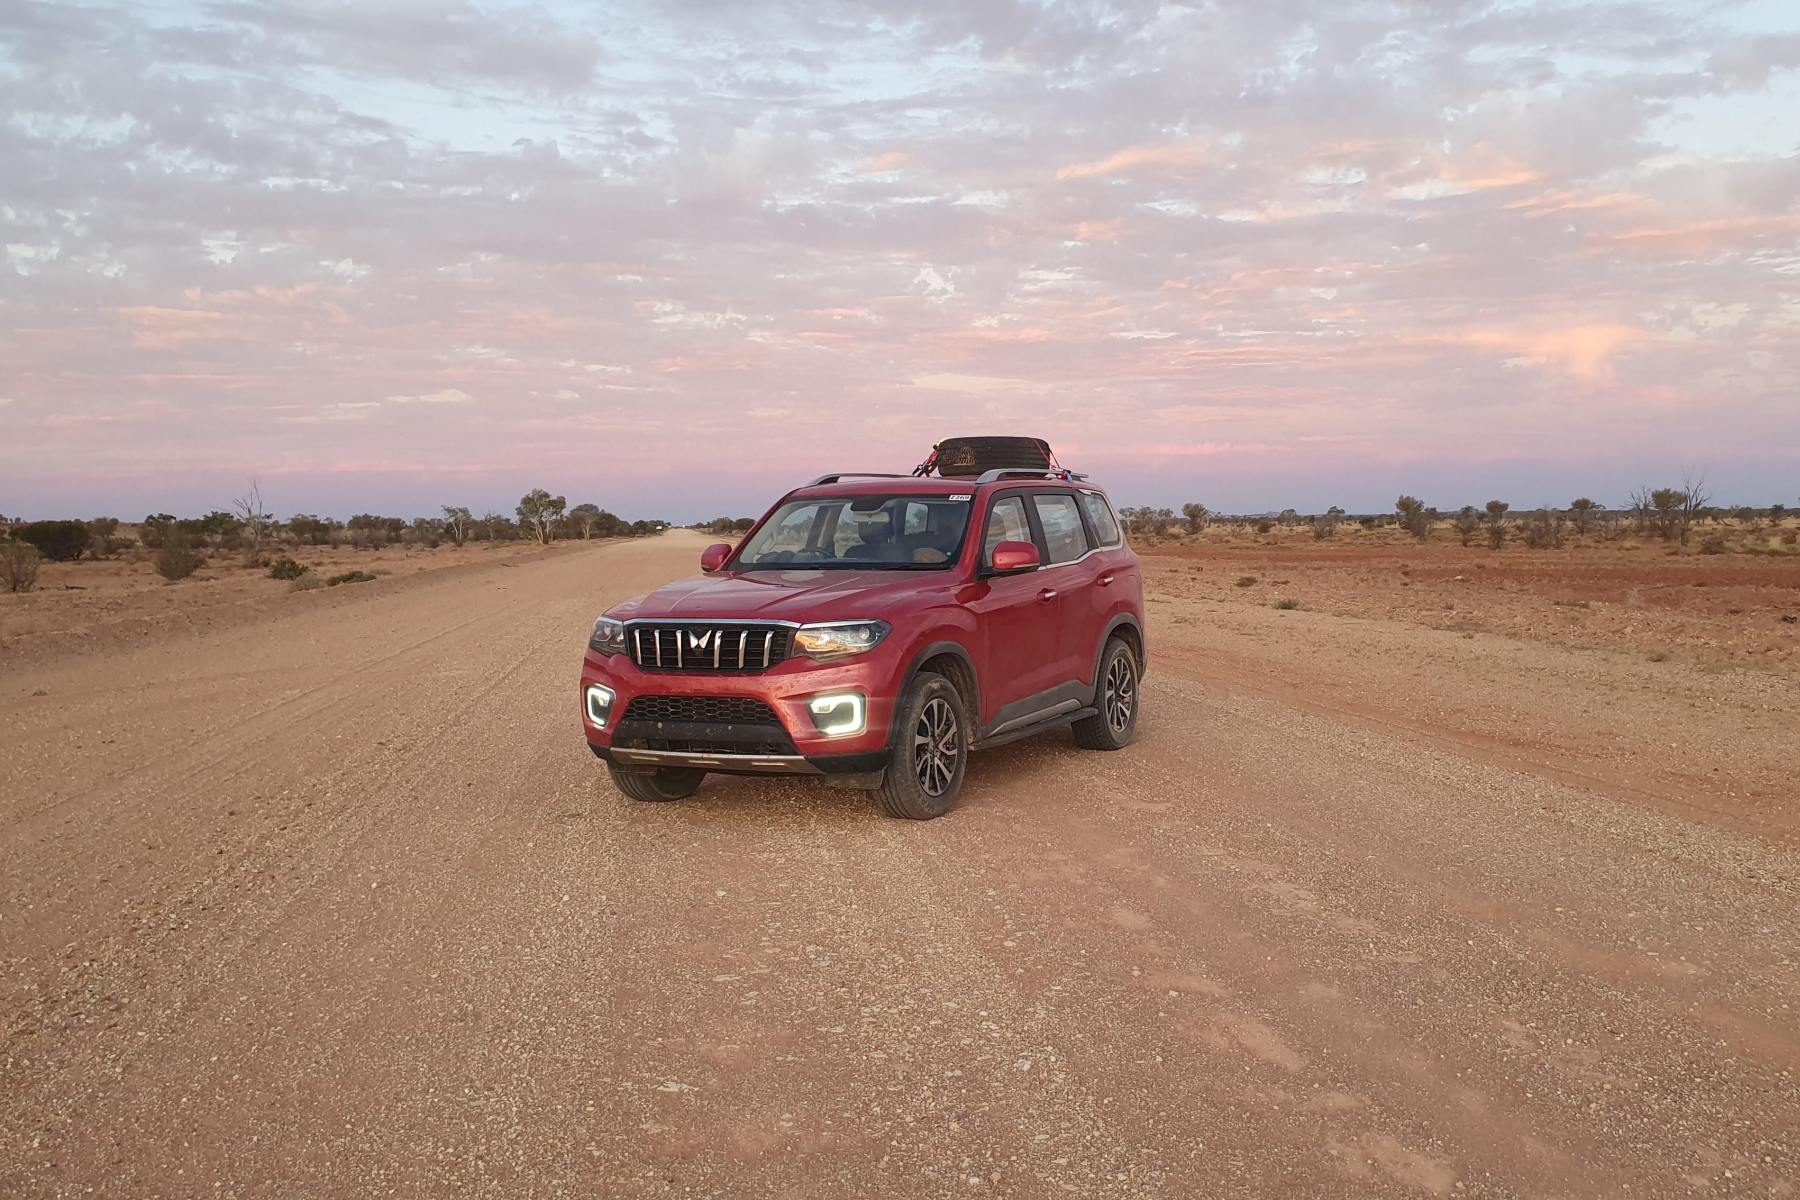 Three All-New Mahindra Scorpio's went through a rigorous independent testing program of 120,000 kms over six months in Australia